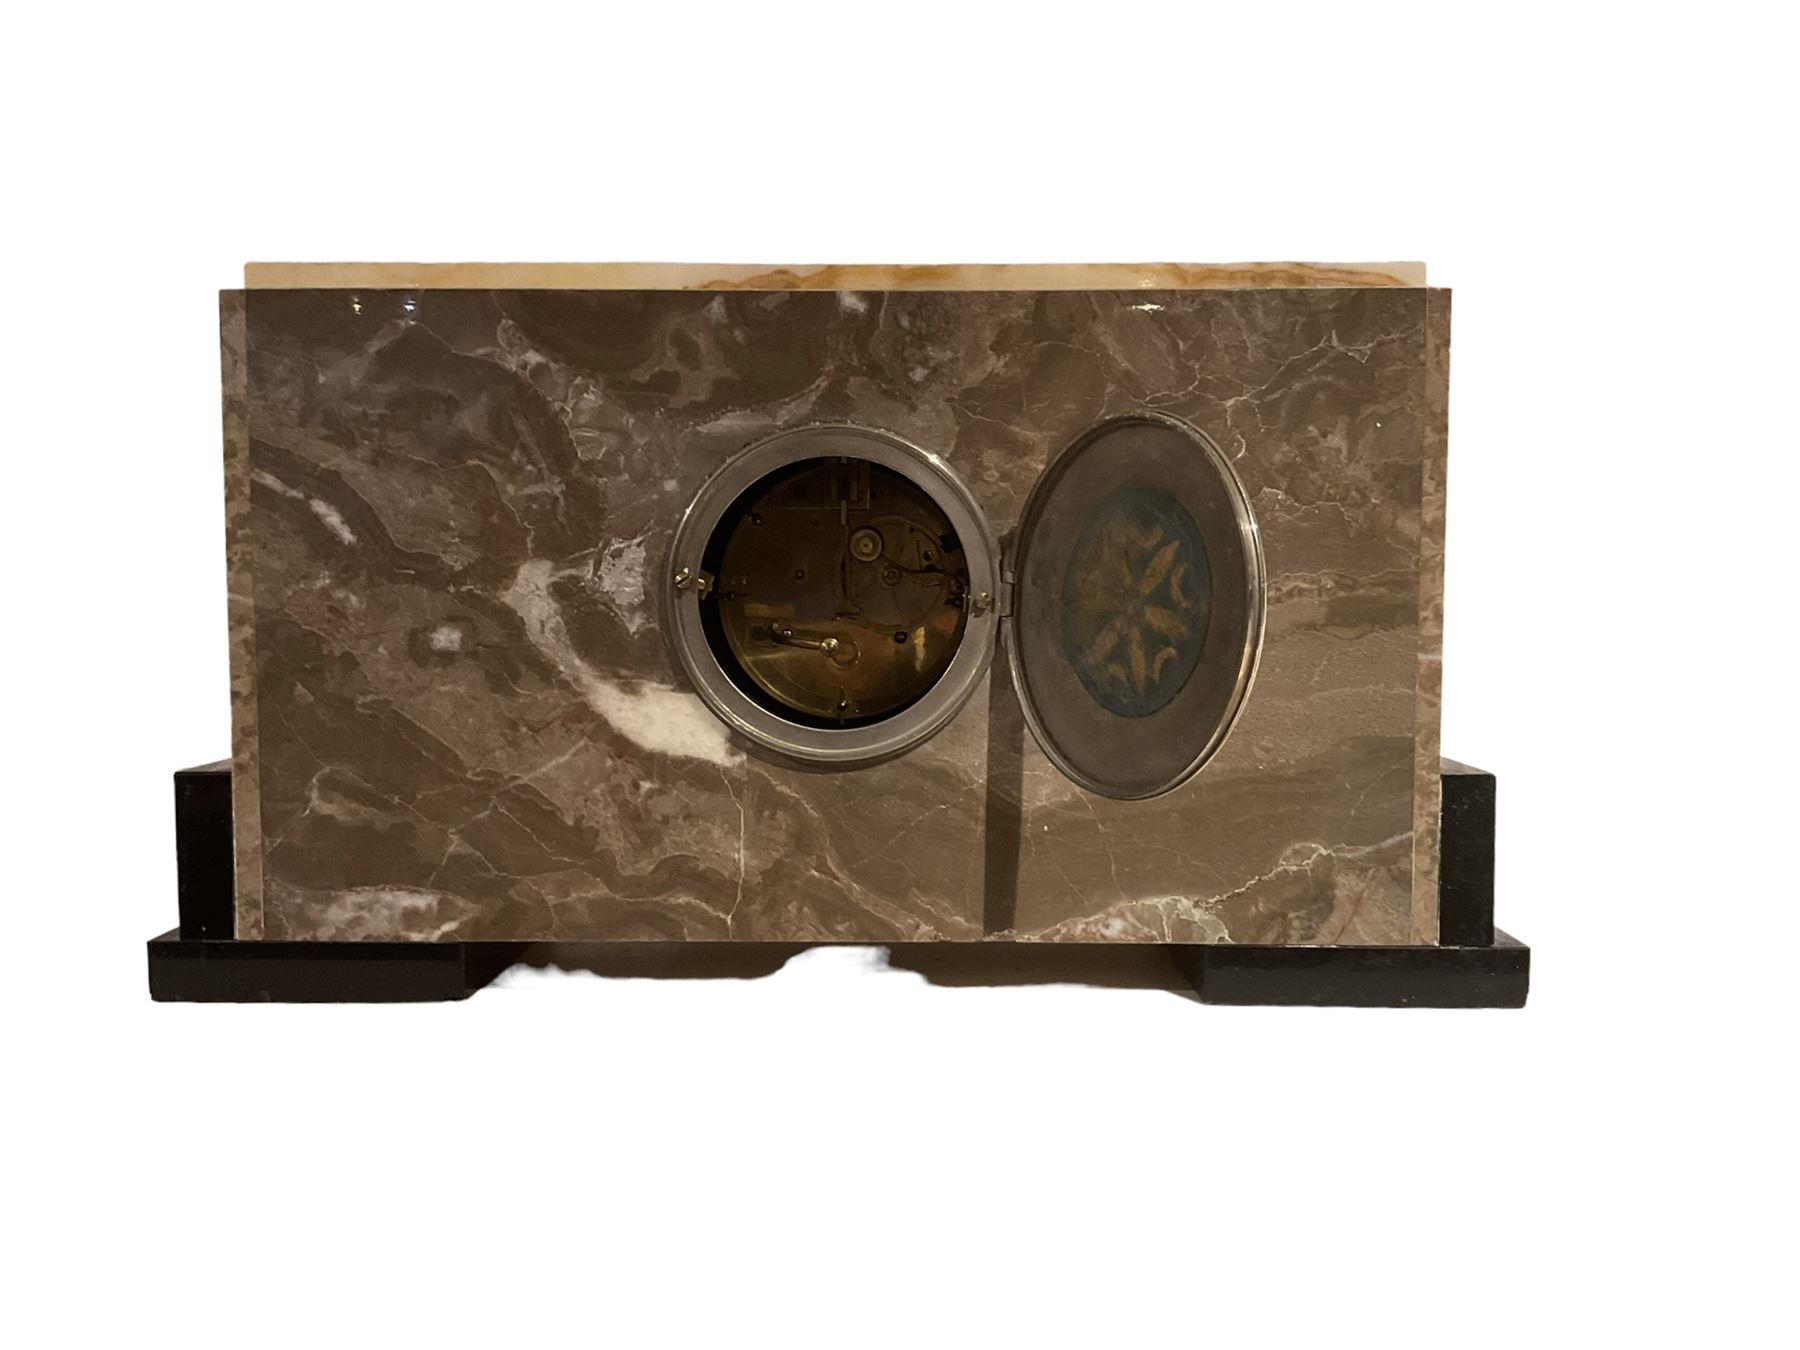 G.Blond - French Art Deco 8-day marble cased mantle clock - Image 3 of 3